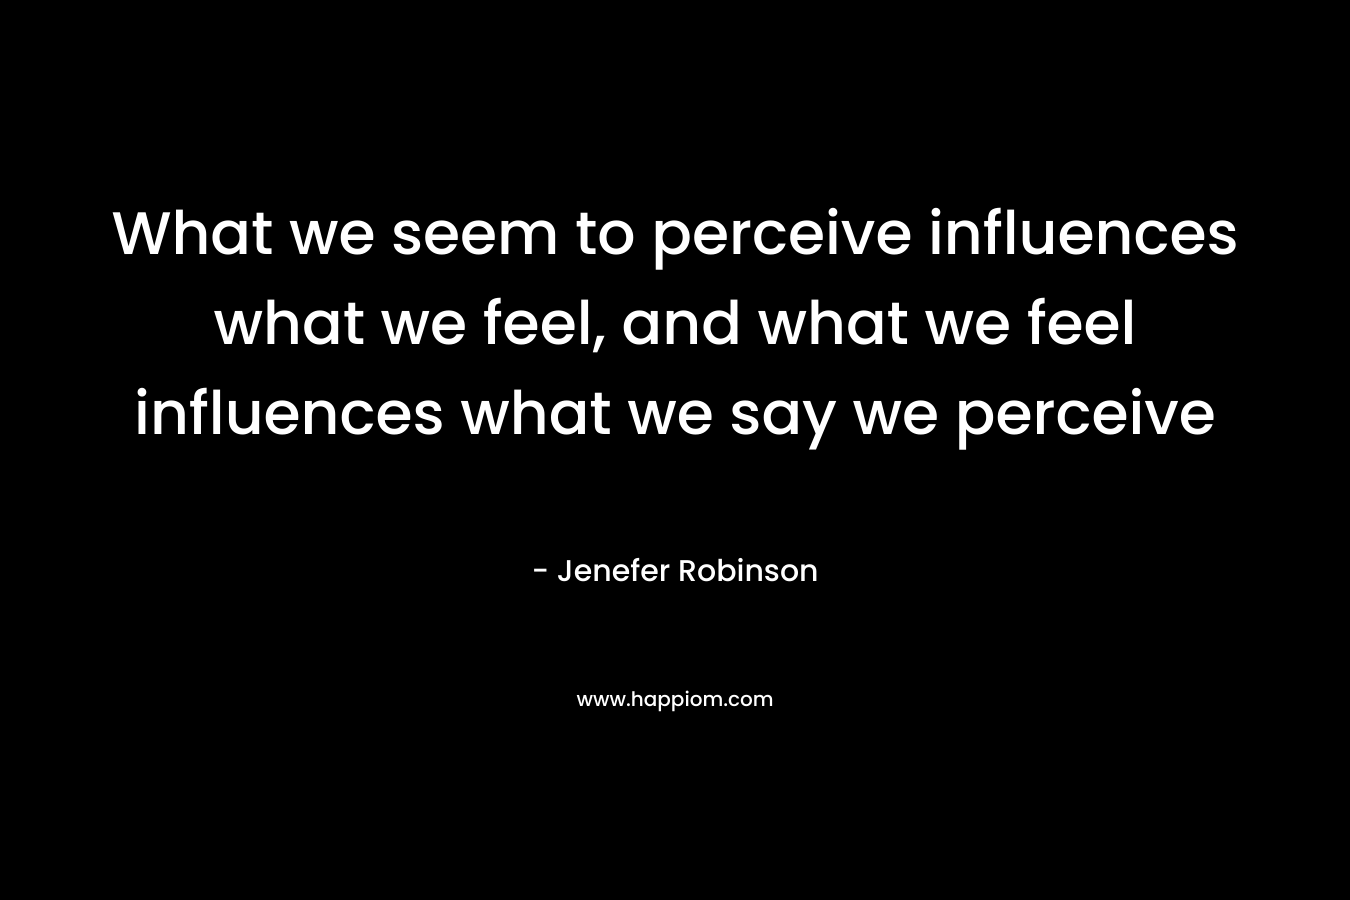 What we seem to perceive influences what we feel, and what we feel influences what we say we perceive